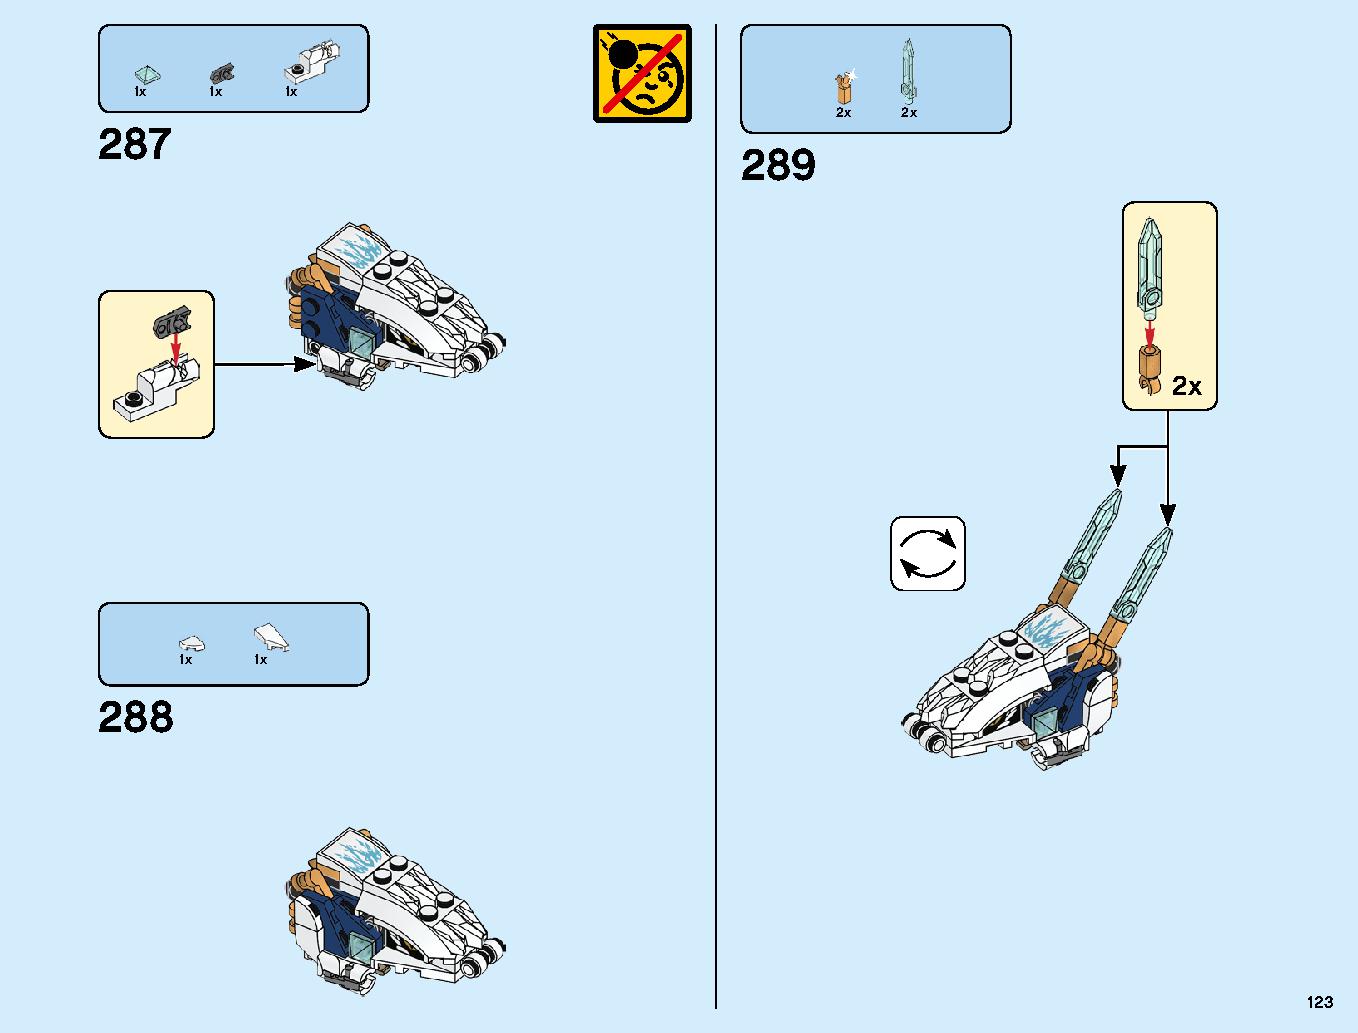 The Ultra Dragon 70679 LEGO information LEGO instructions 123 page